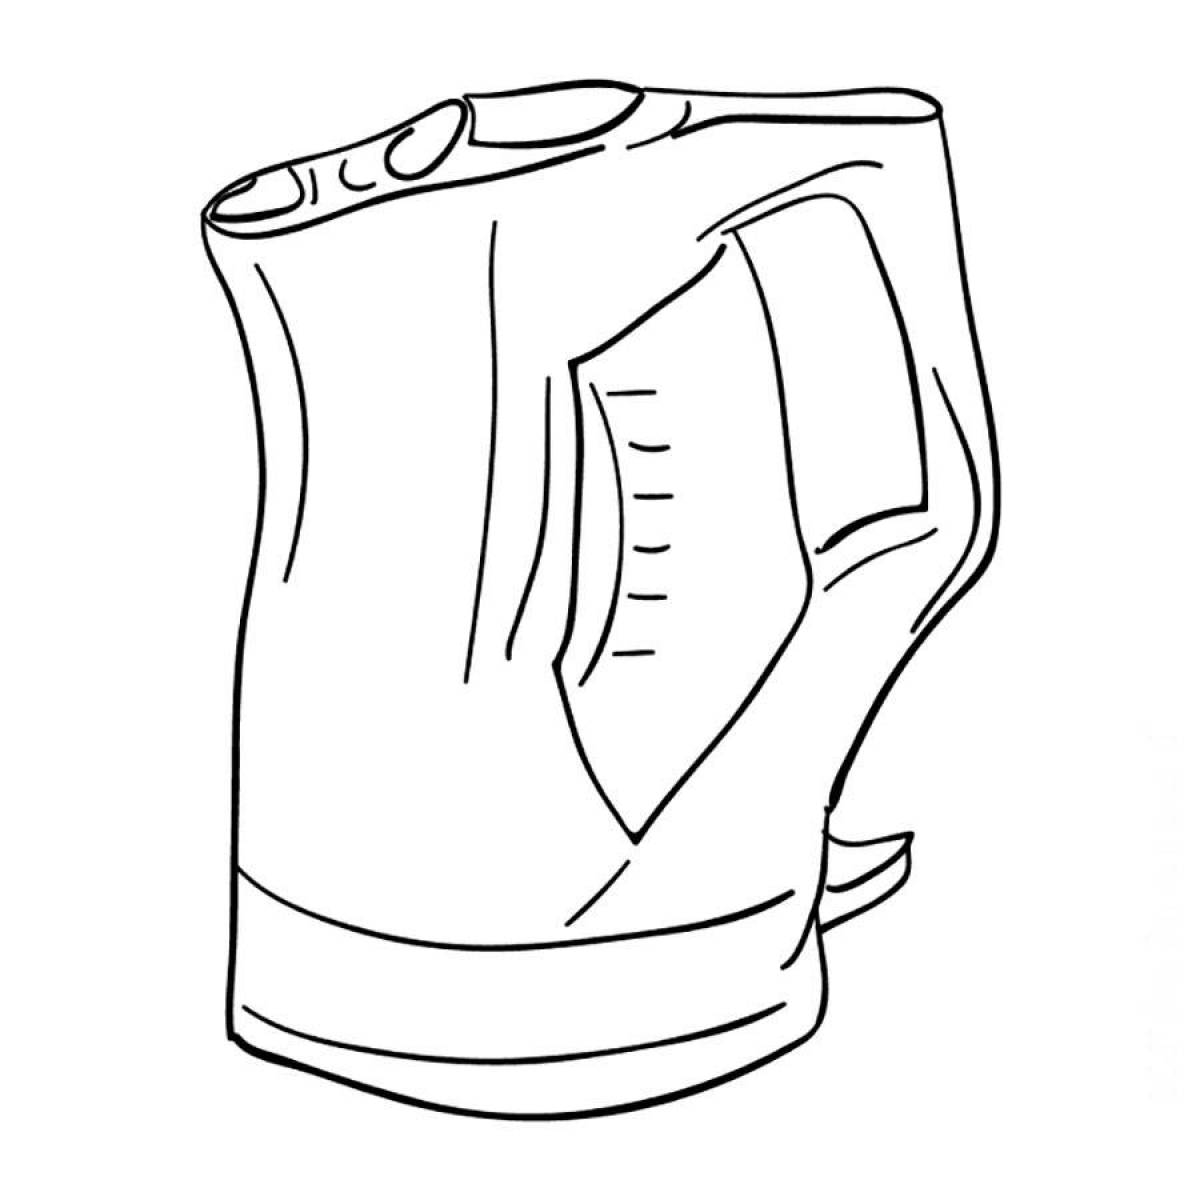 Wonderful electrical appliances coloring page